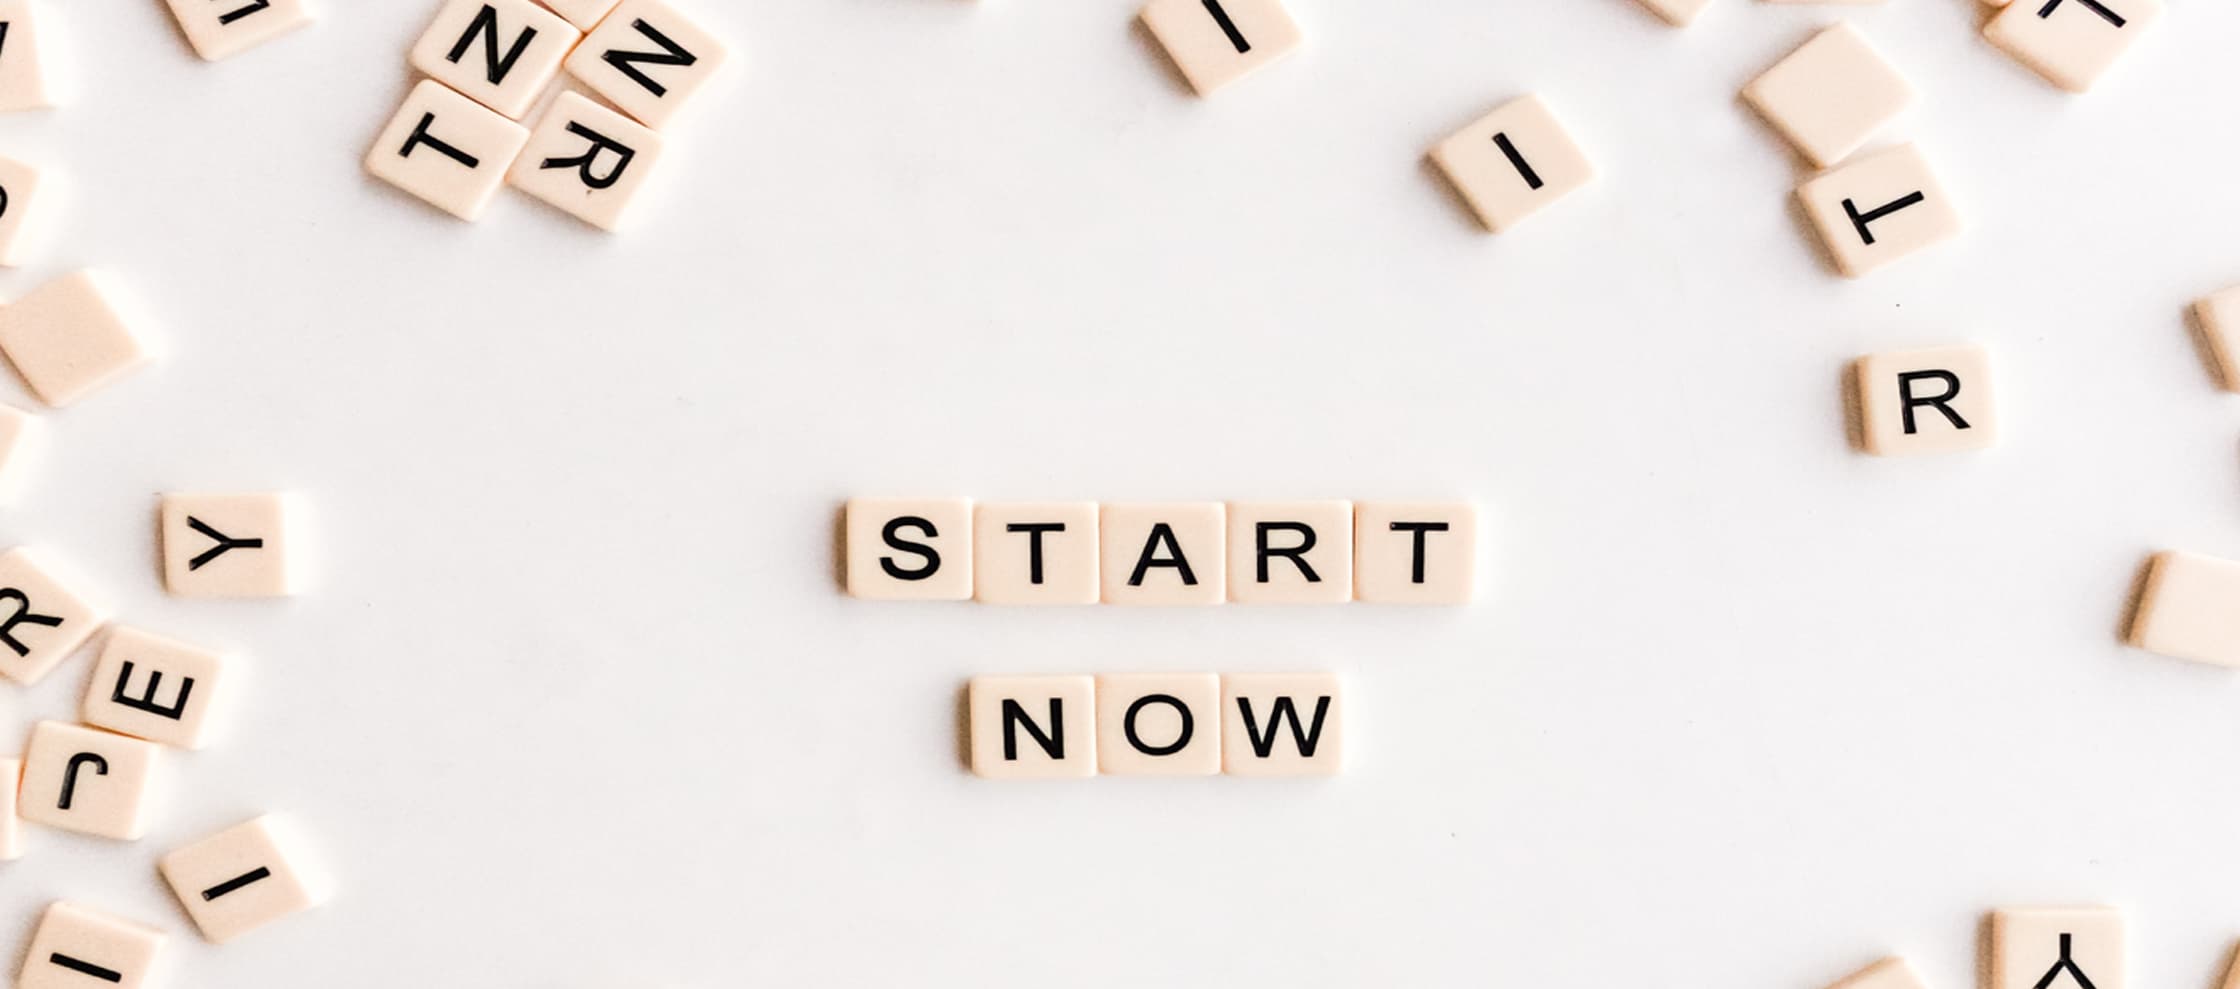 its never too late to start now our blog post image